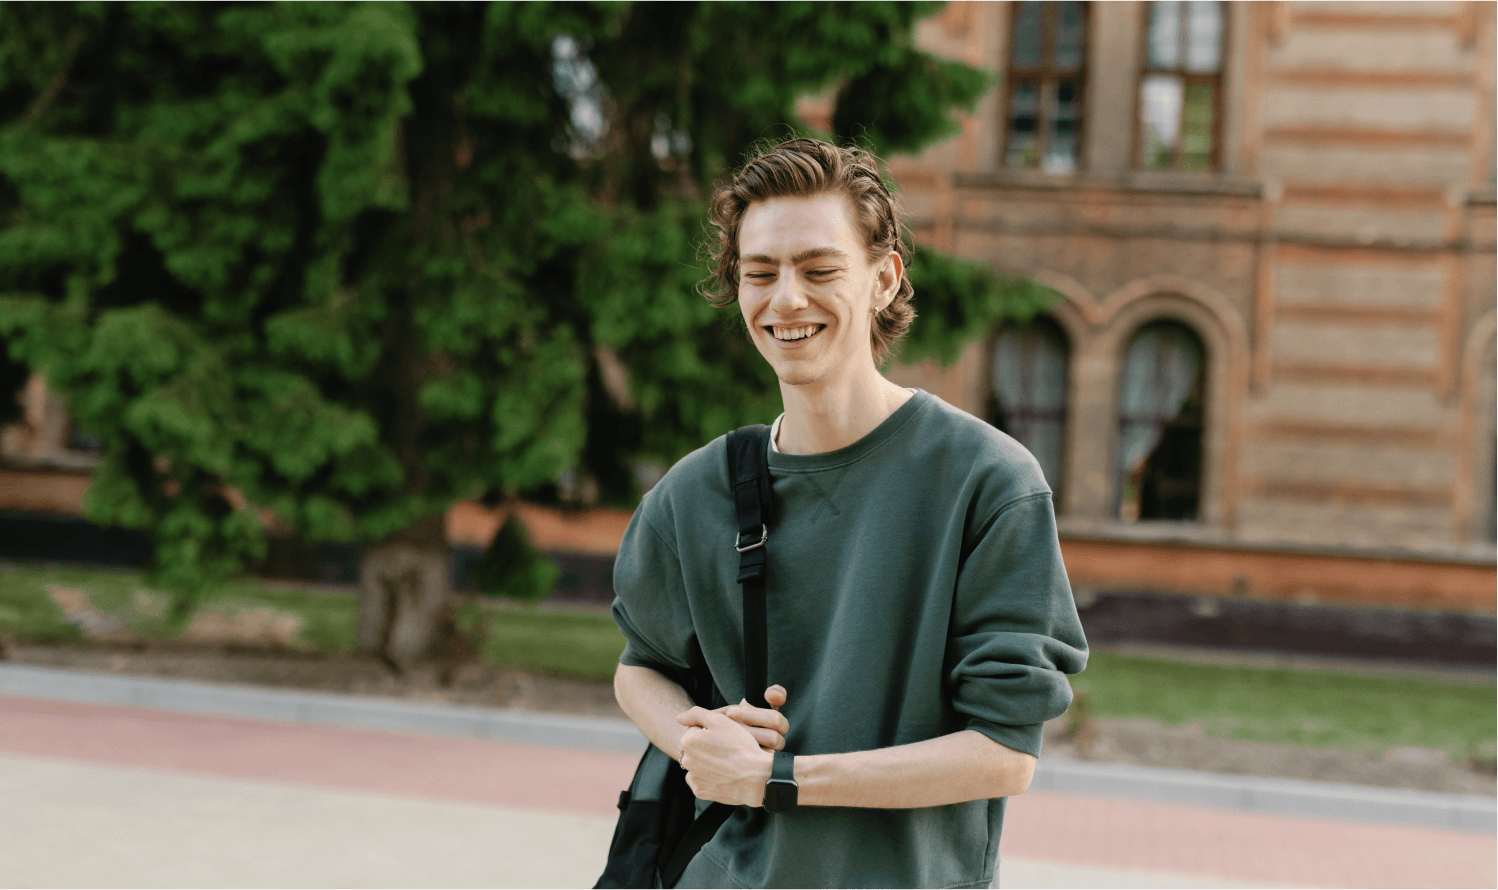 A college student wearing a backpack smiles on his way to class.